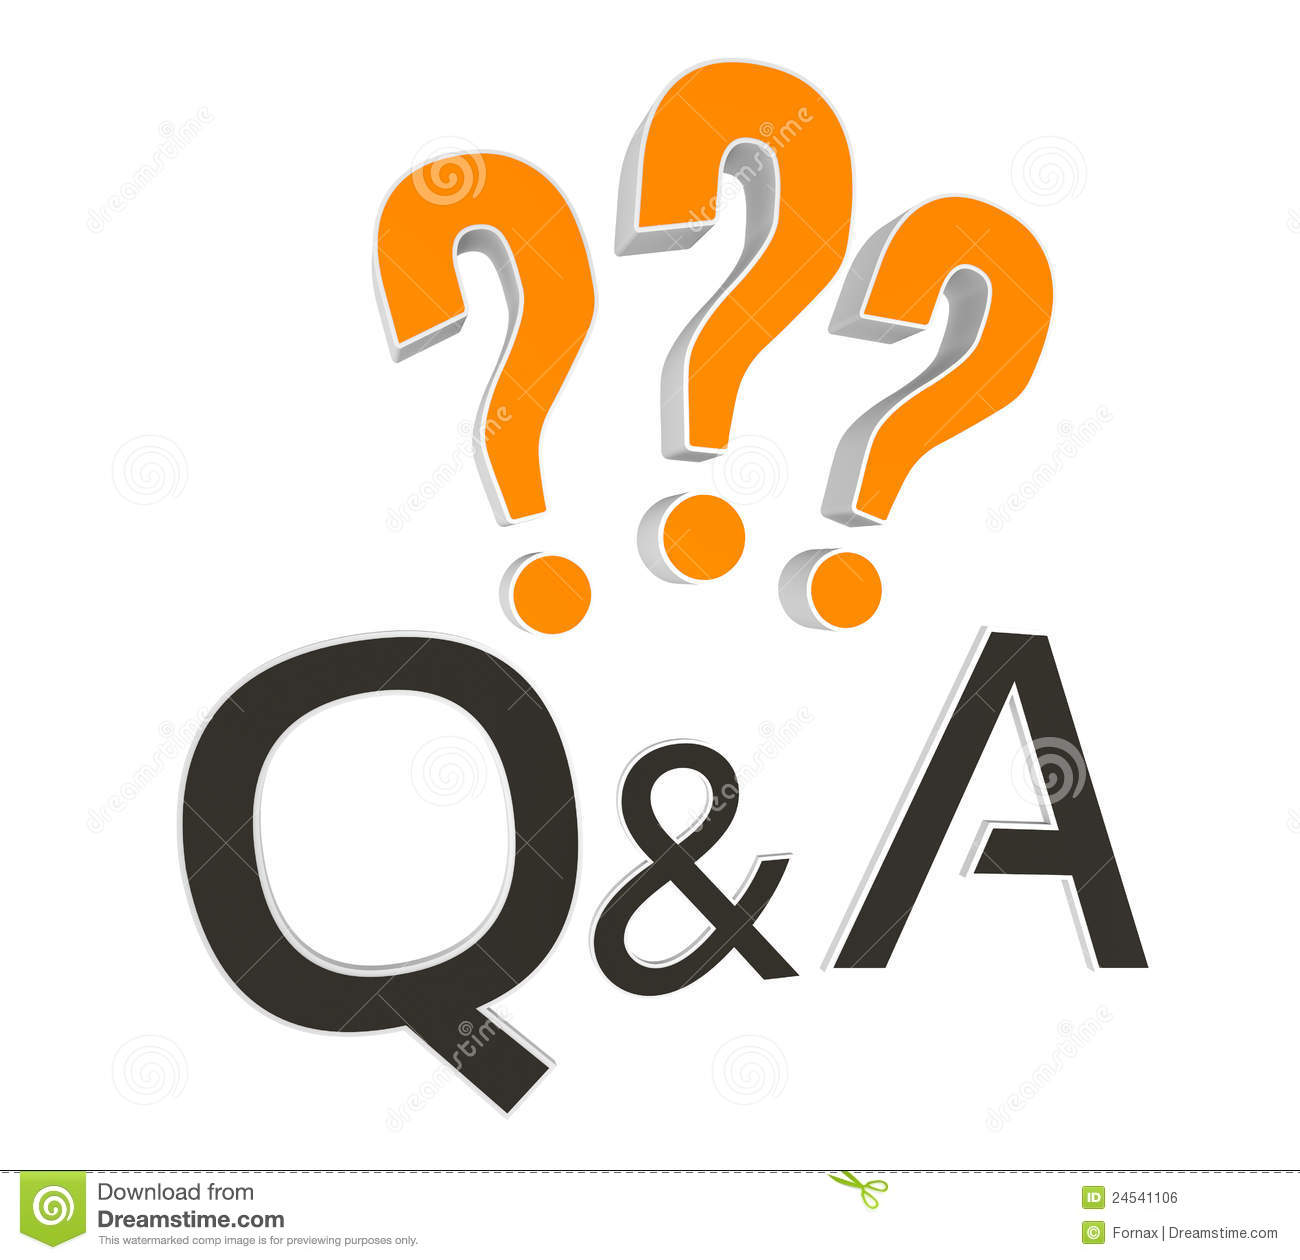 Questions And Answers Royalty Free Stock Image   Image  24541106